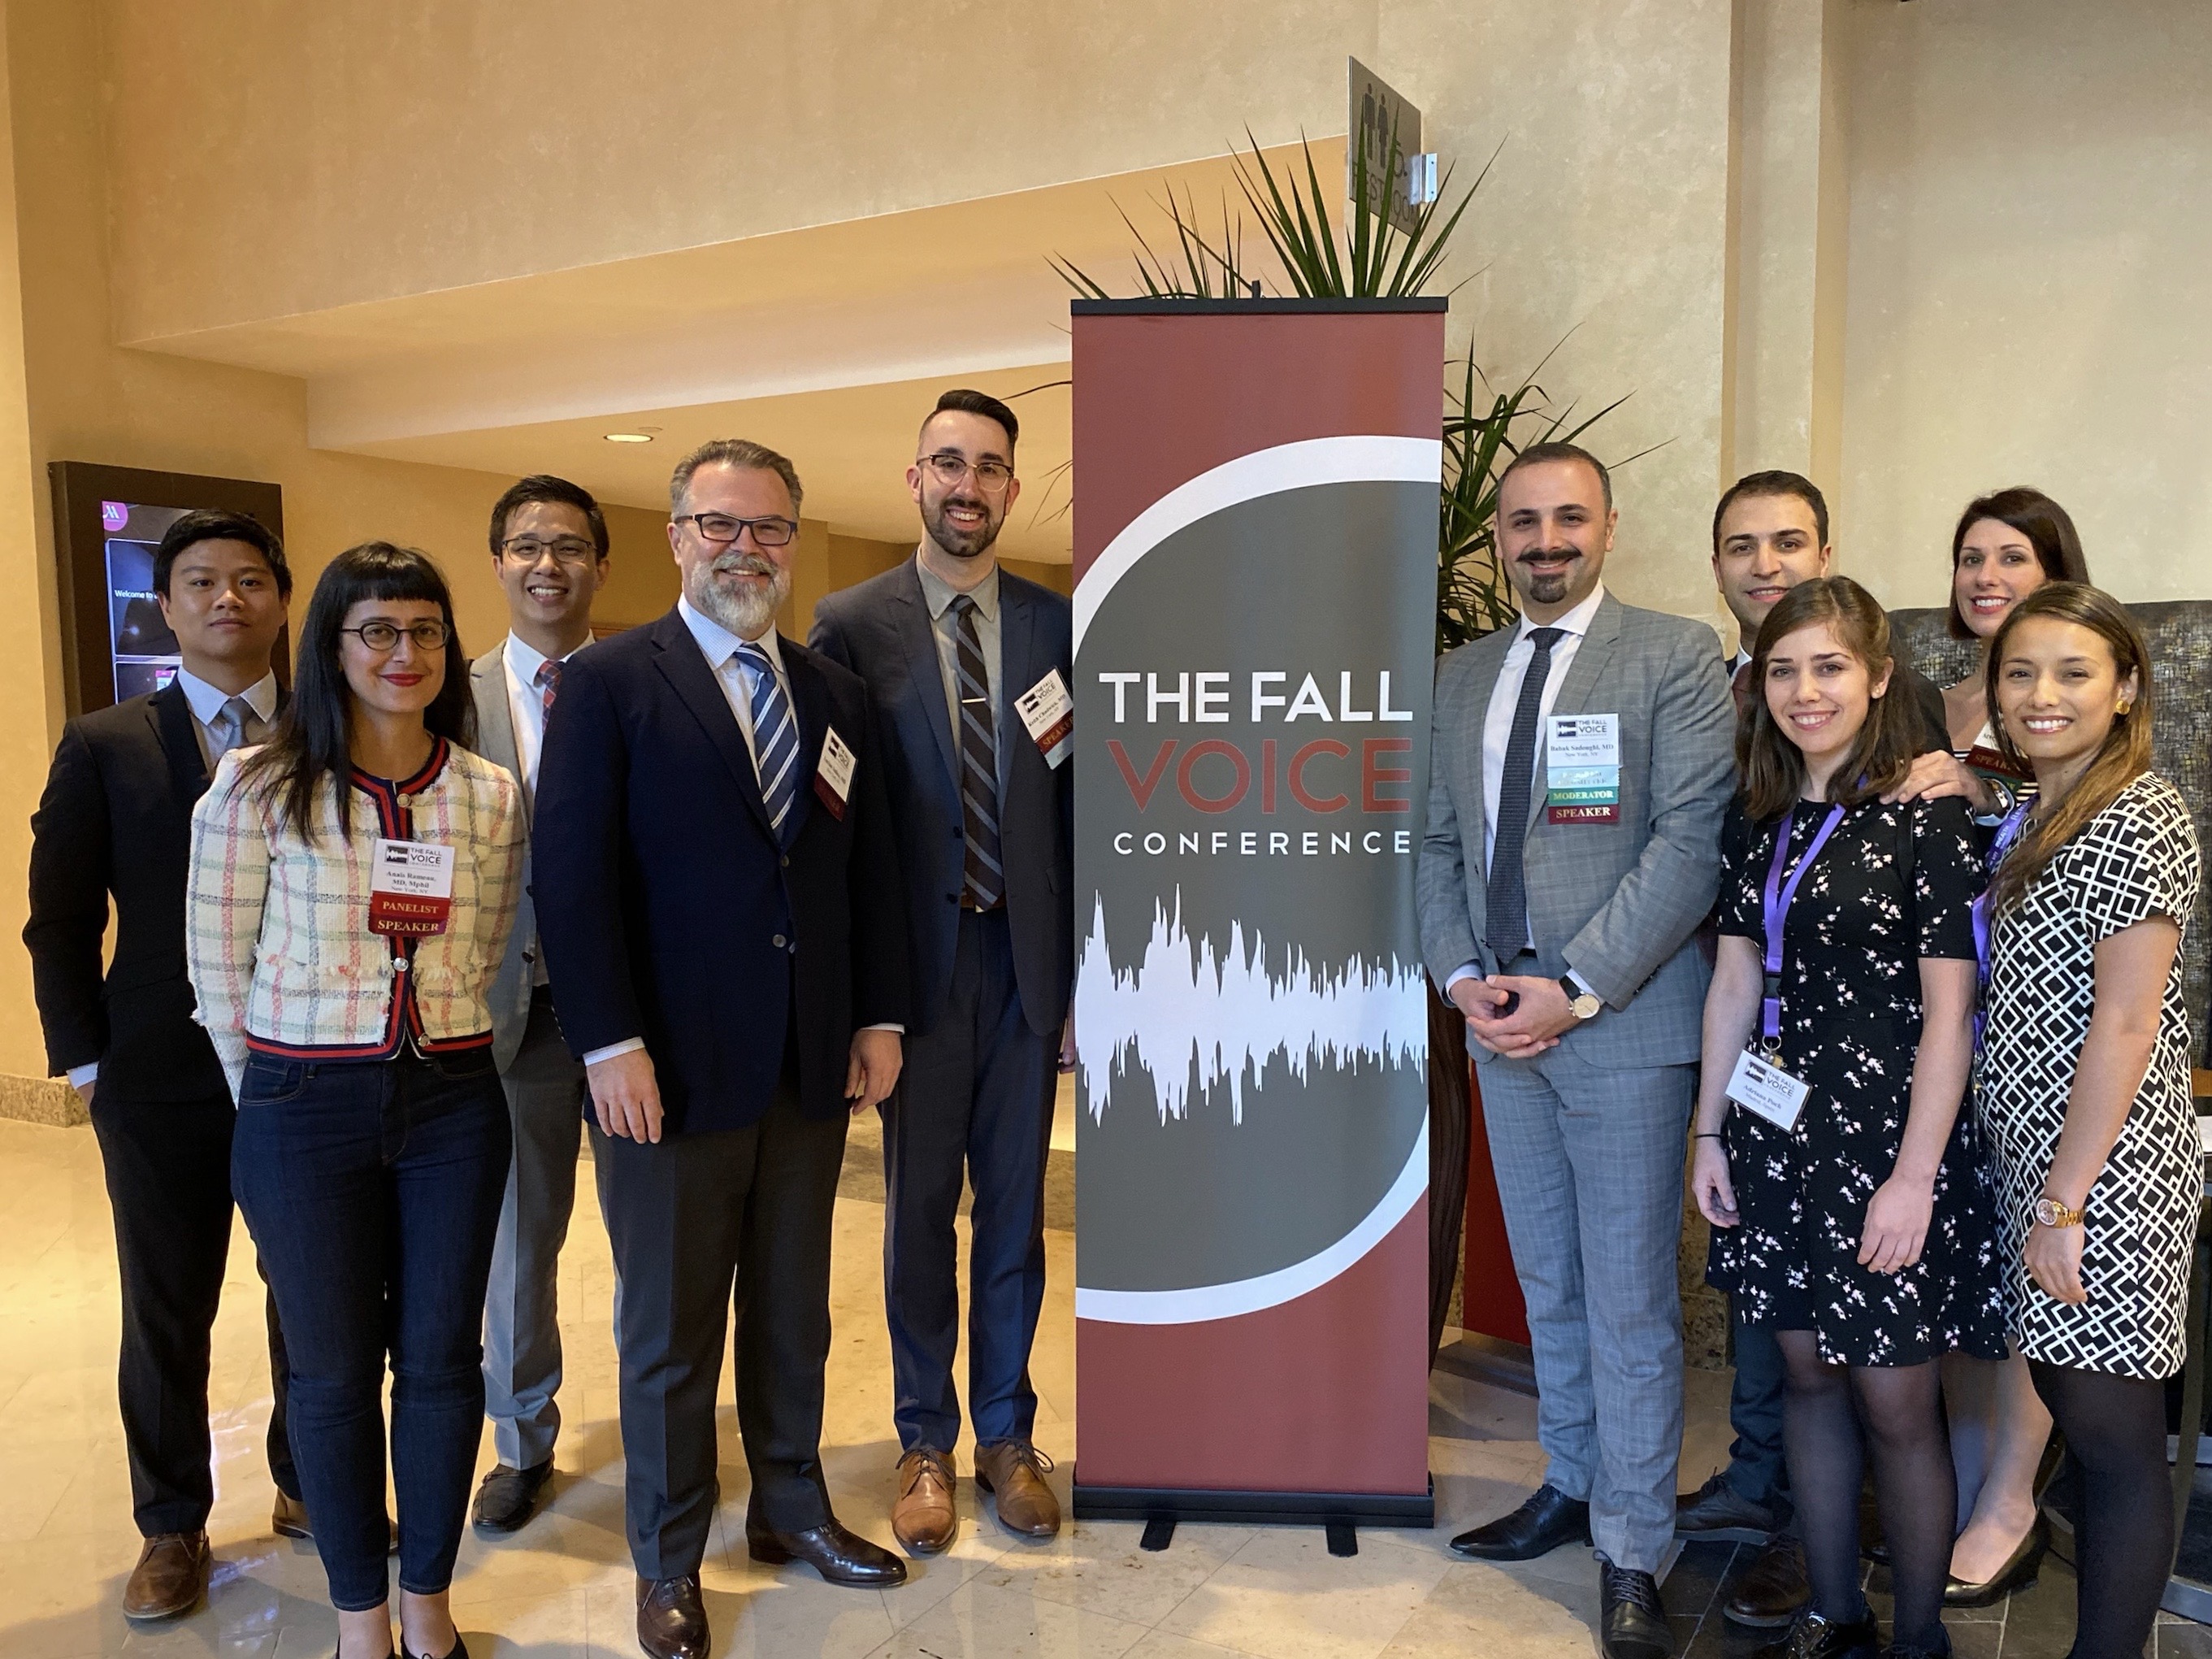 Sean Parker Institute Personnel at Fall Voice 2019